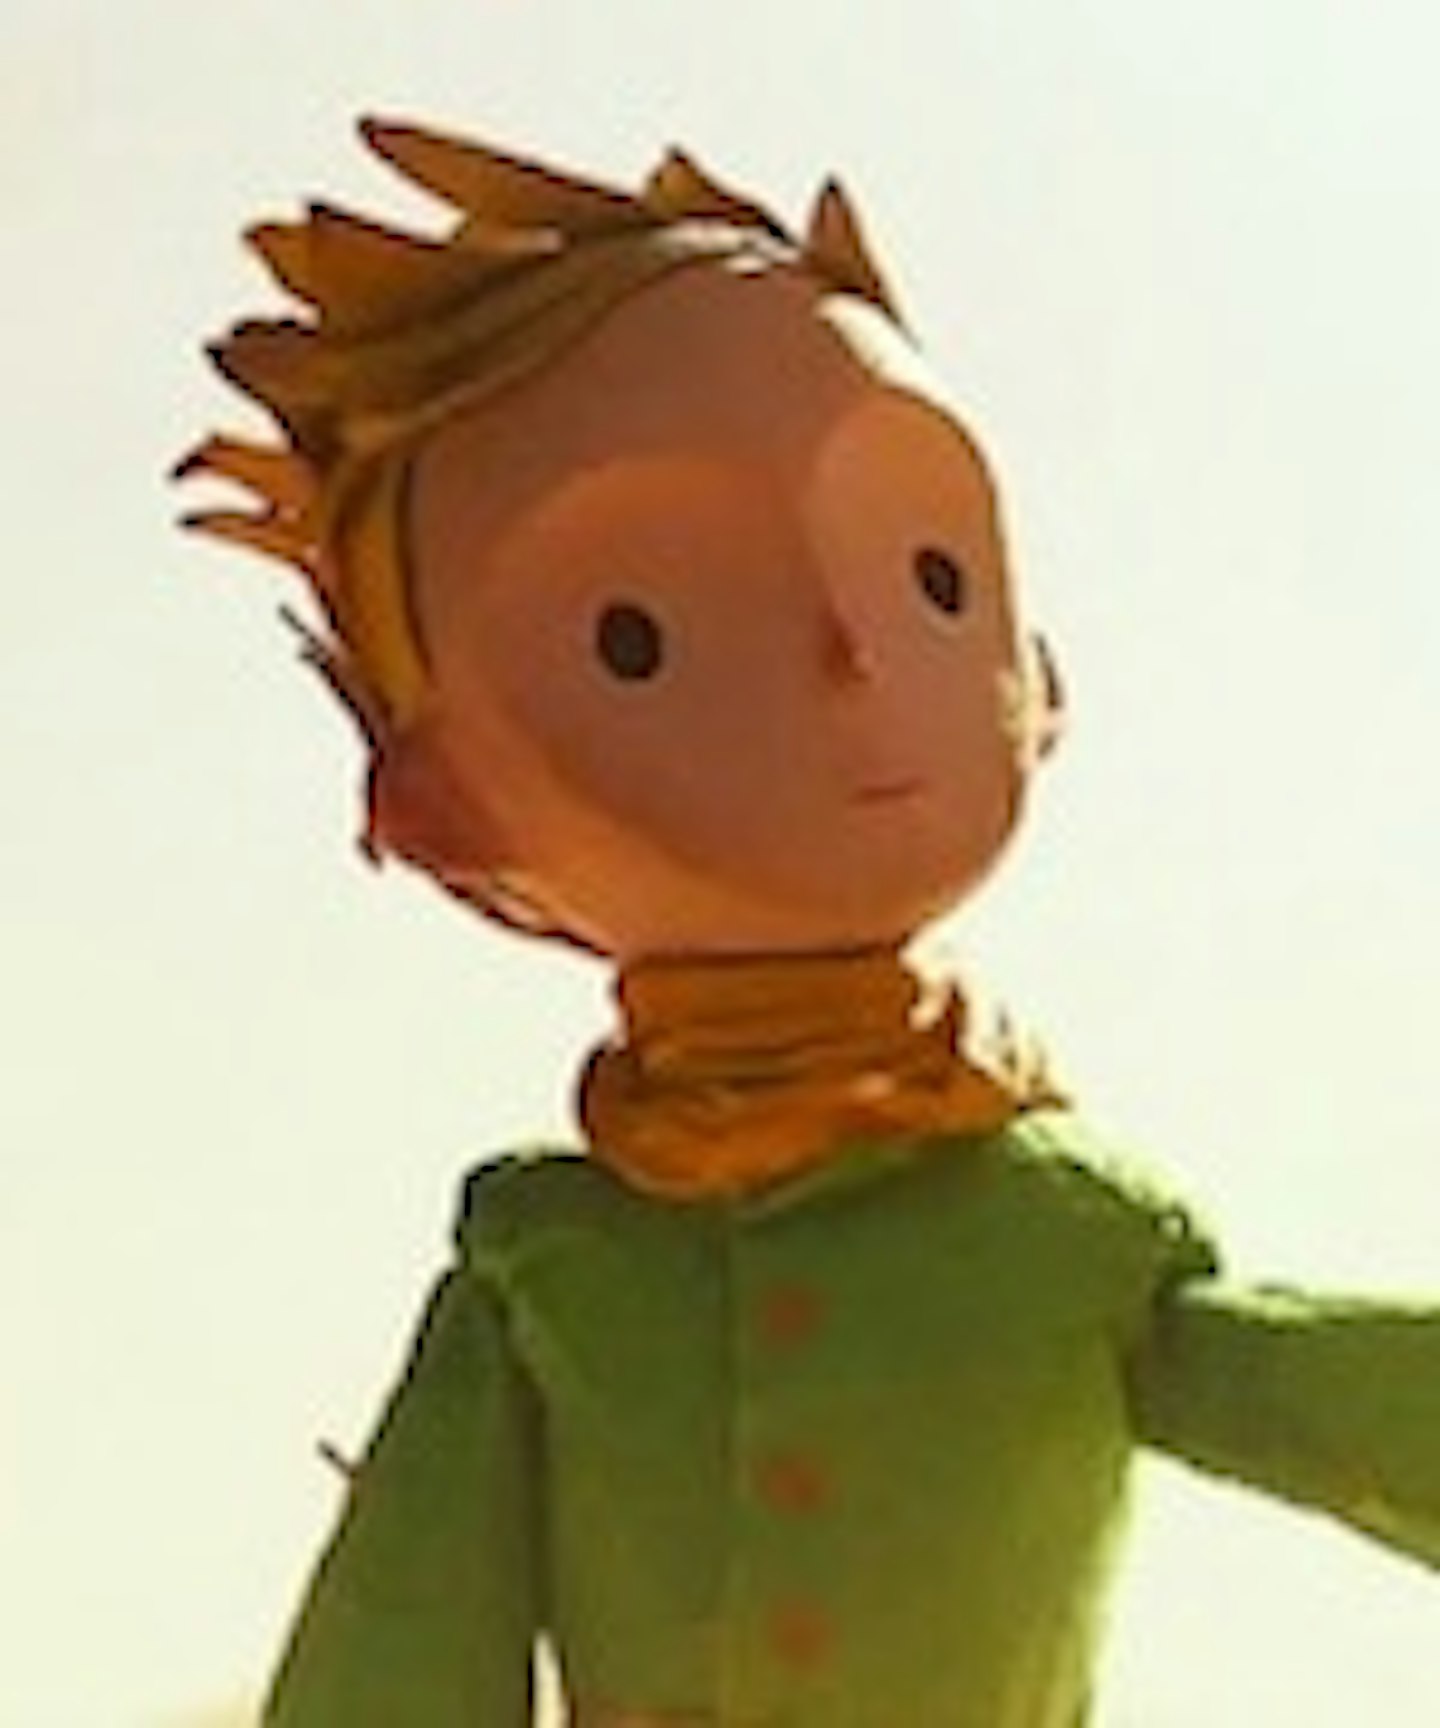 Trailer For The Little Prince Flies Online